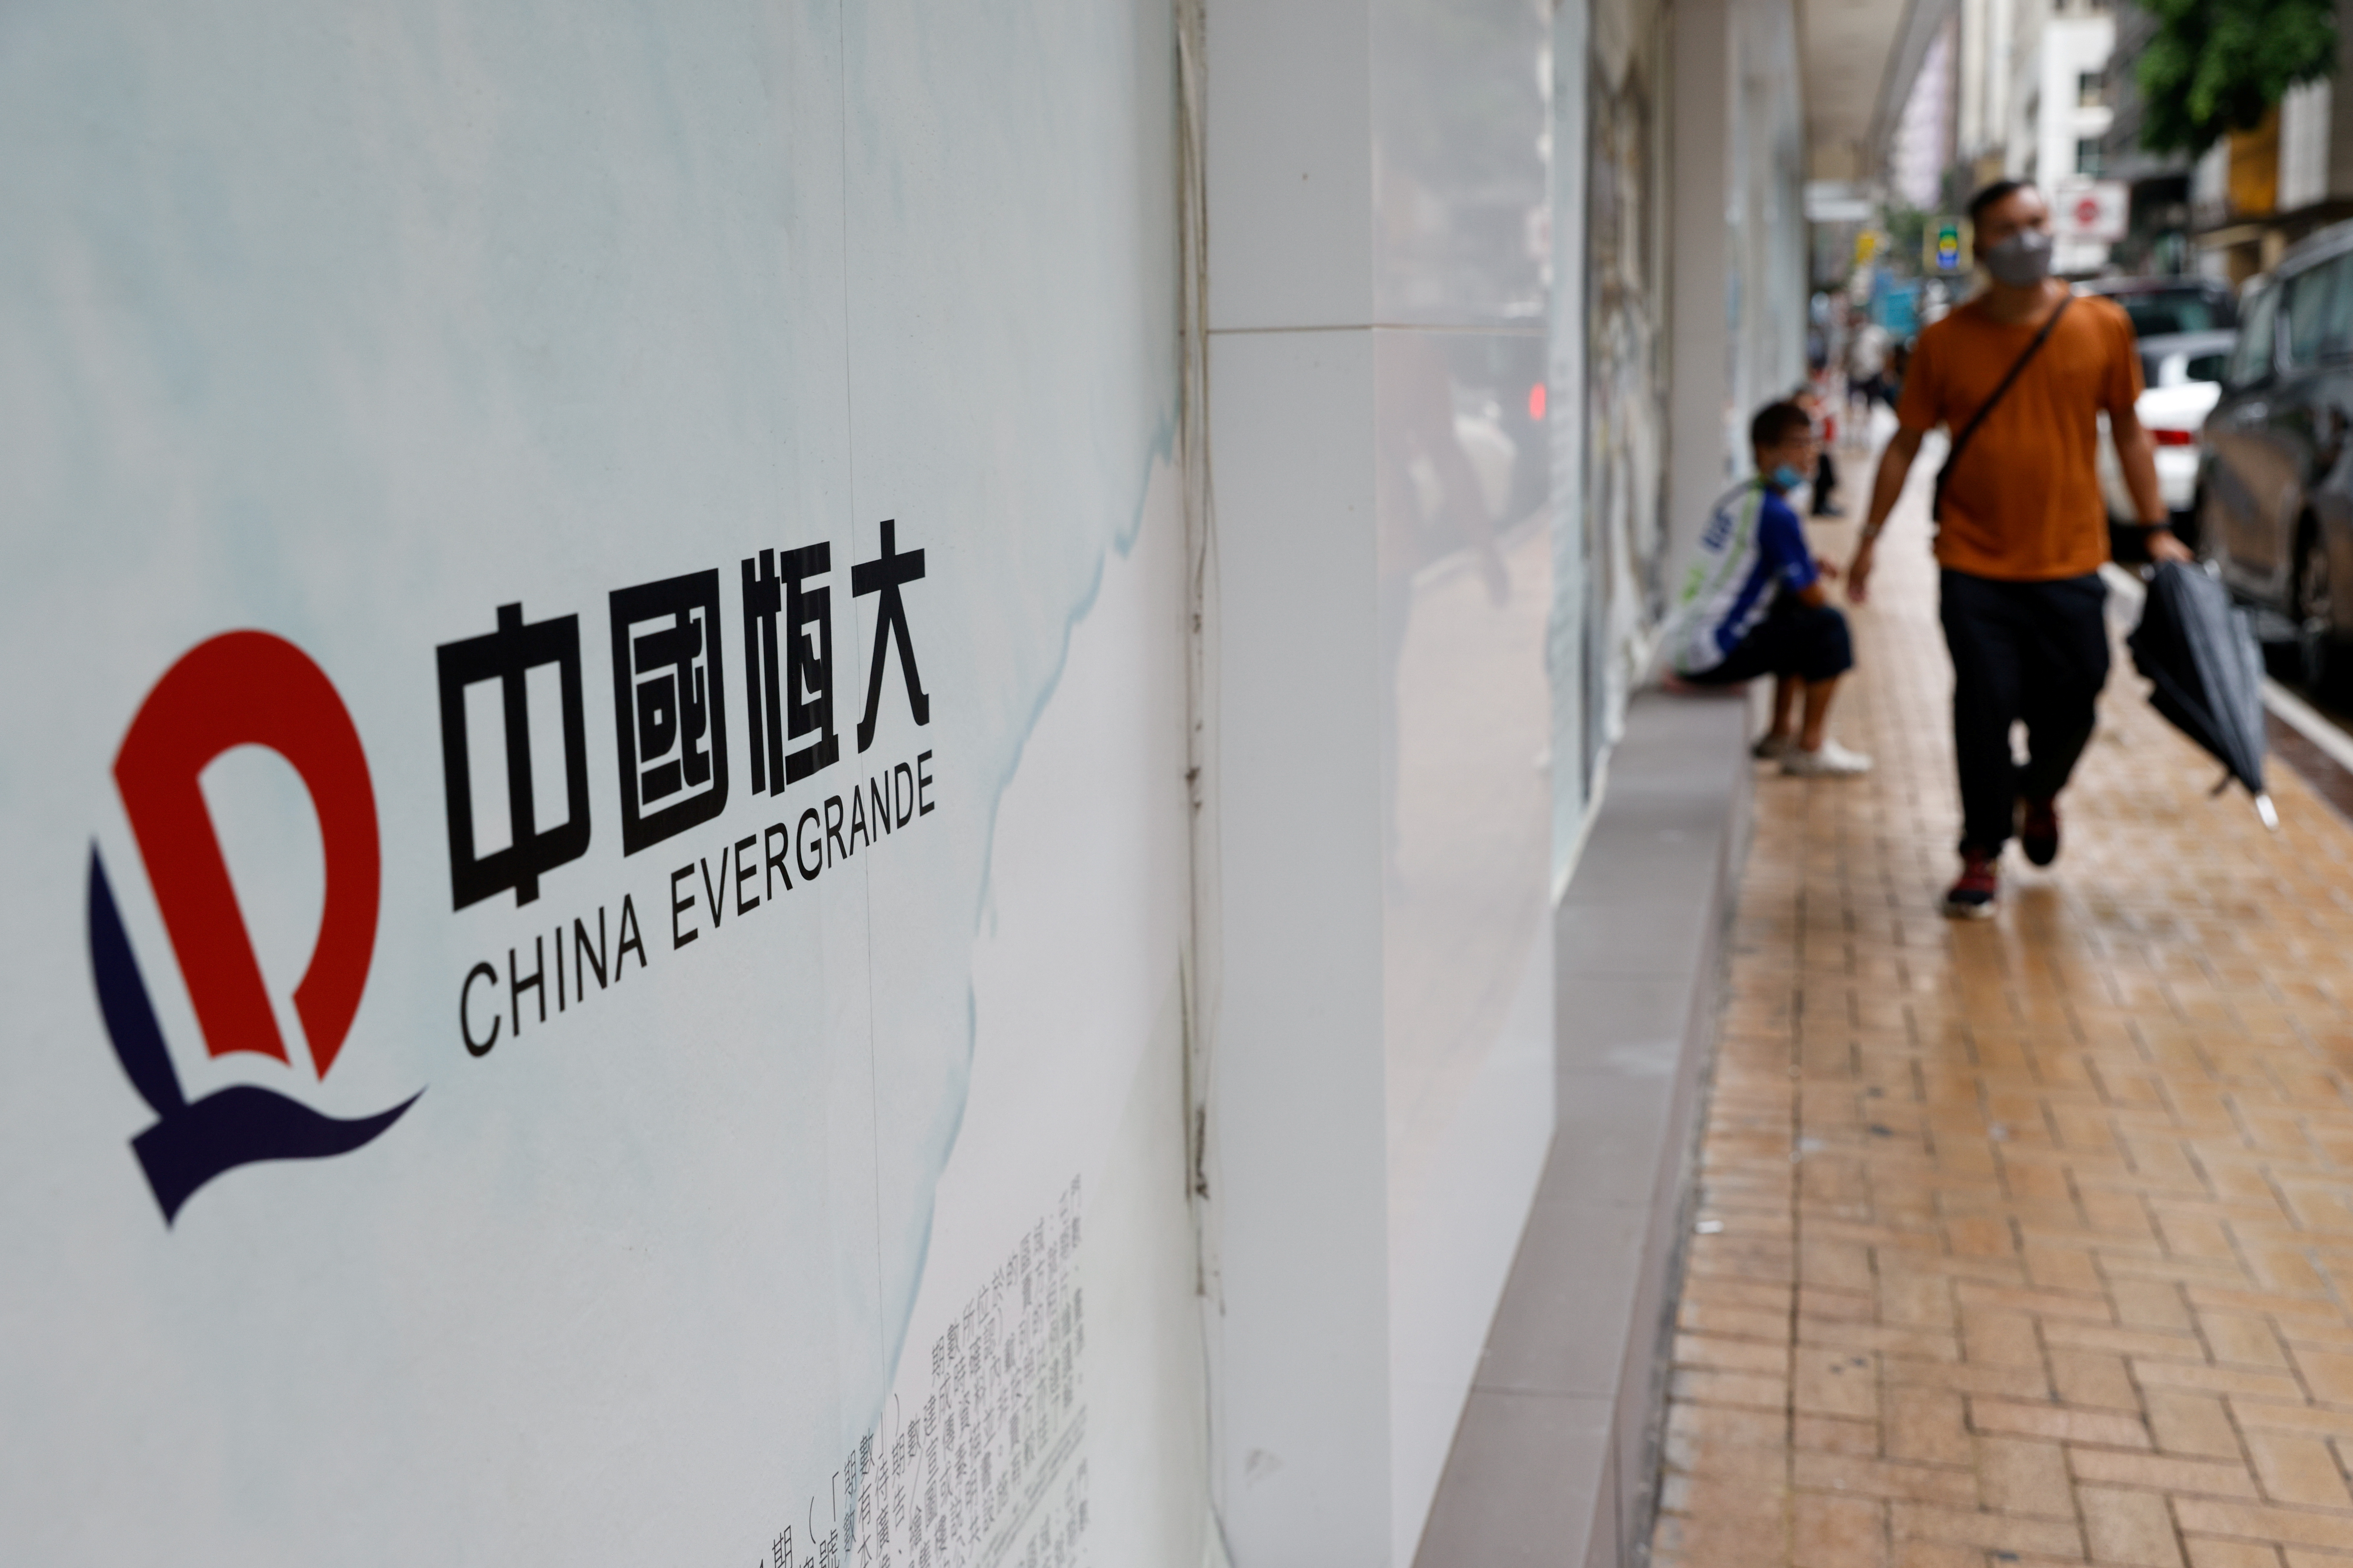 The logo of China Evergrande is seen at outside China Evergrande Centre building in Hong Kong, China September 23, 2021. REUTERS/Tyrone Siu/File Photo